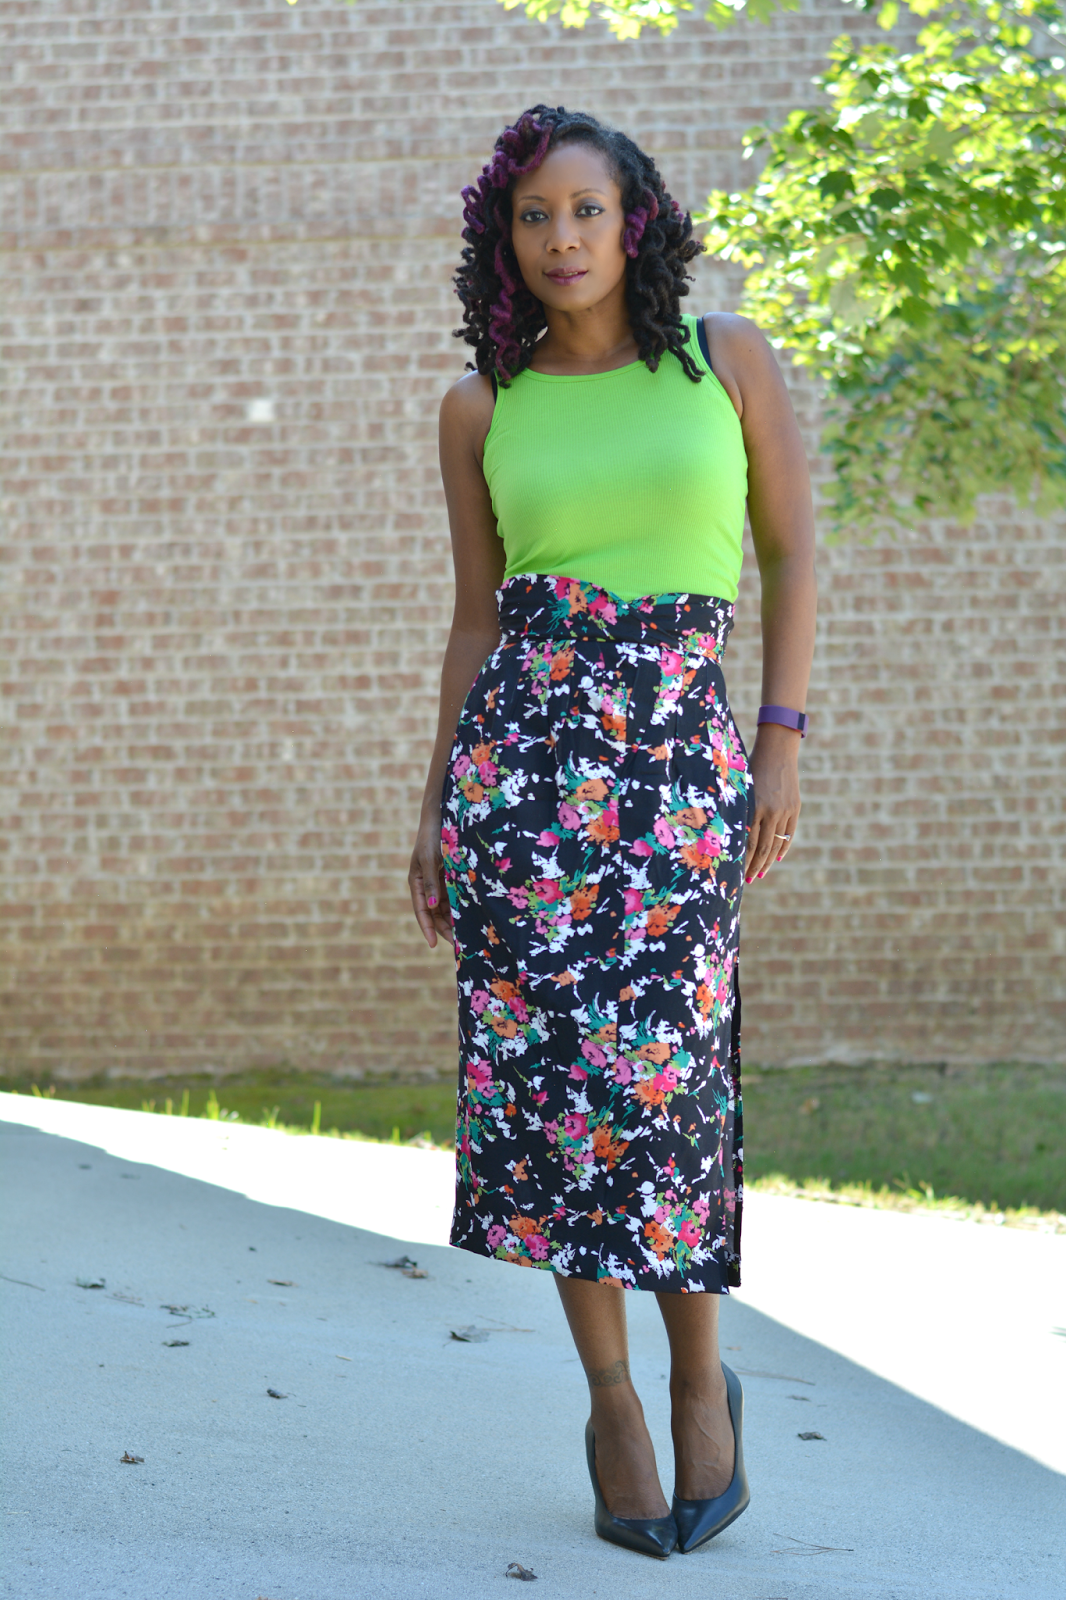 How to Remove Frump From Thrift Store Skirt | Thriftanista in the City